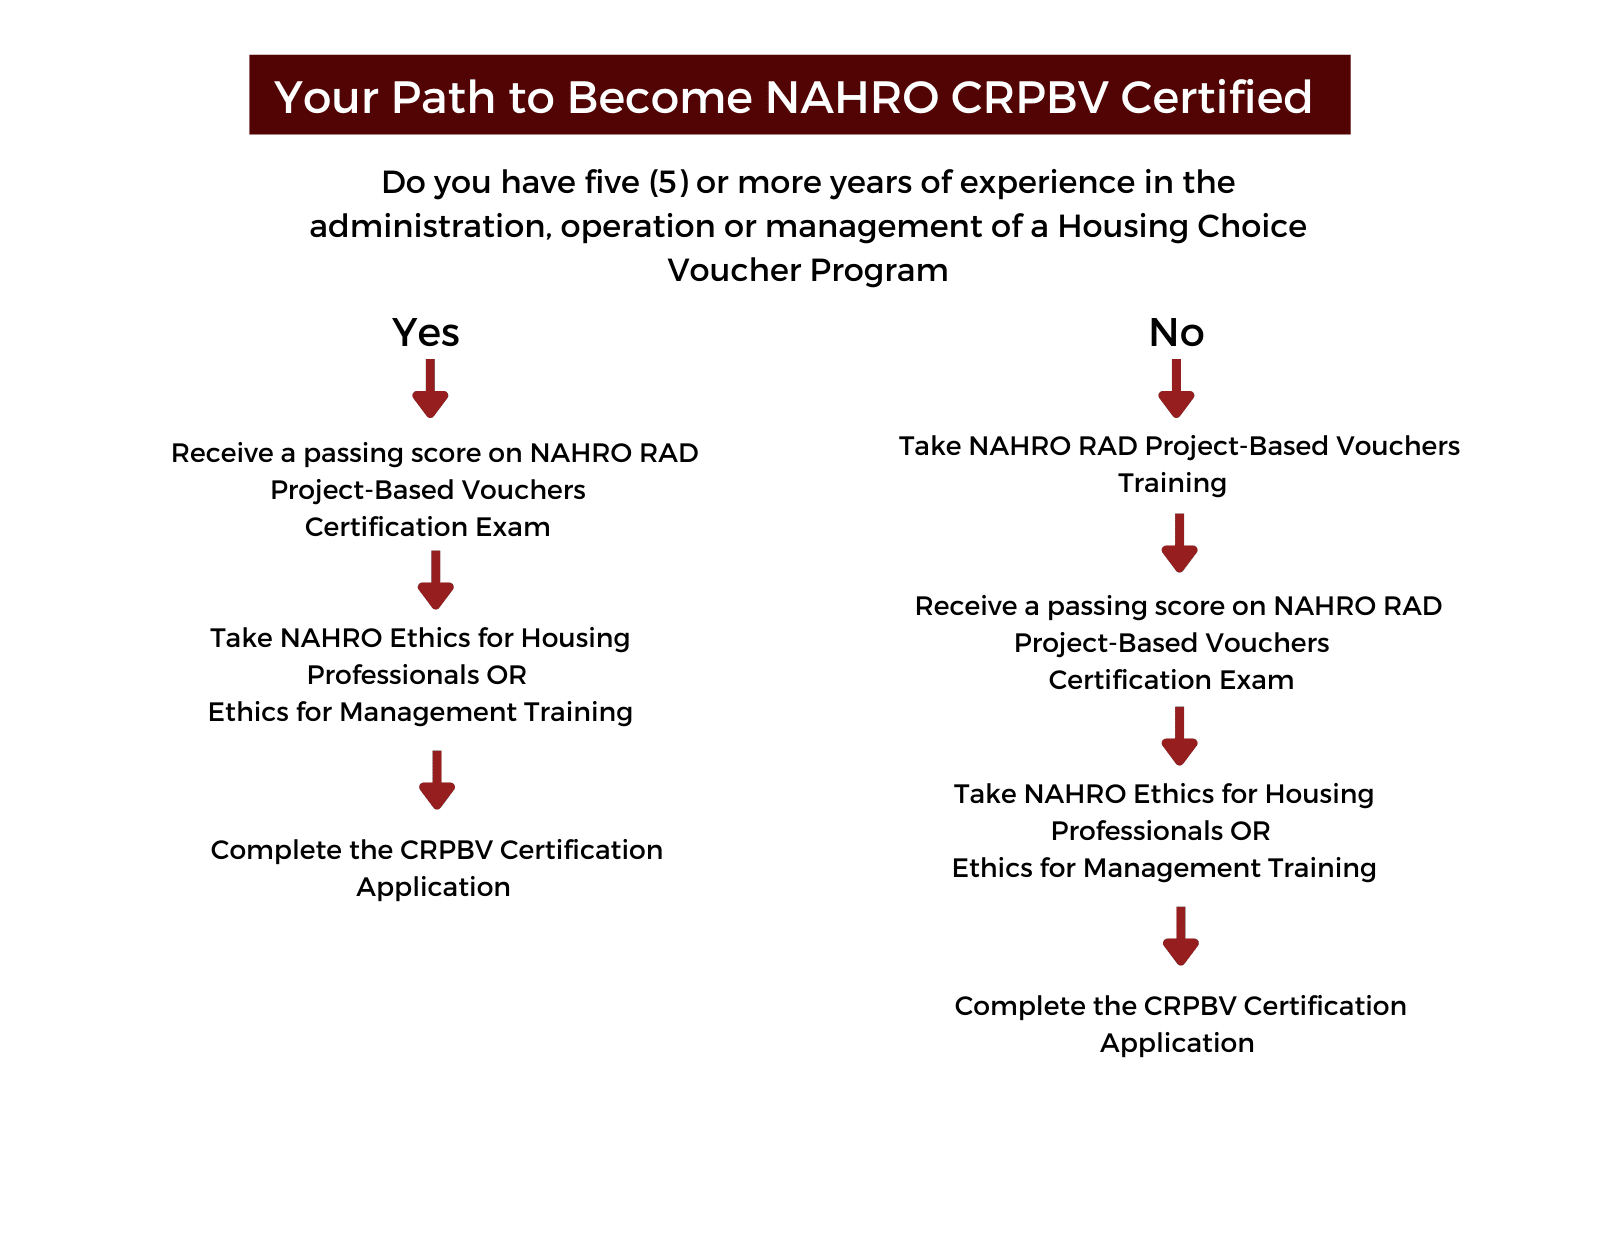 Your Path to Become NAHRO Certified Specialist RAD Project Based Vouchers (CRPBV) Flow Chart  There are two paths to become NAHRO CRPBV Certified.  Path 1: If you do not have five or more years of experience working in the administration, operation, or management of a Housing Choice Voucher Program, you are required to take either the NAHRO RAD Project-Based Voucher Training. This path also requires you to receive a passing score on the NAHRO RAD Project-Based Vouchers Certification Exam, take NAHRO Ethics for Housing Professionals or Ethics for Management Training and Complete the CRPBV Certification Application.  Path 2: If you have five or more years of experience working in the administration, operation, or management of a Housing Choice Voucher Program, you may forgo the NAHRO RAD Project-Based Voucher Training. This path still requires you to receive a passing score on RAD Project-Based Vouchers Certification Exam, take NAHRO Ethics for Housing Professionals or Ethics for Management Training, and Complete the CRPBV Certification Application.